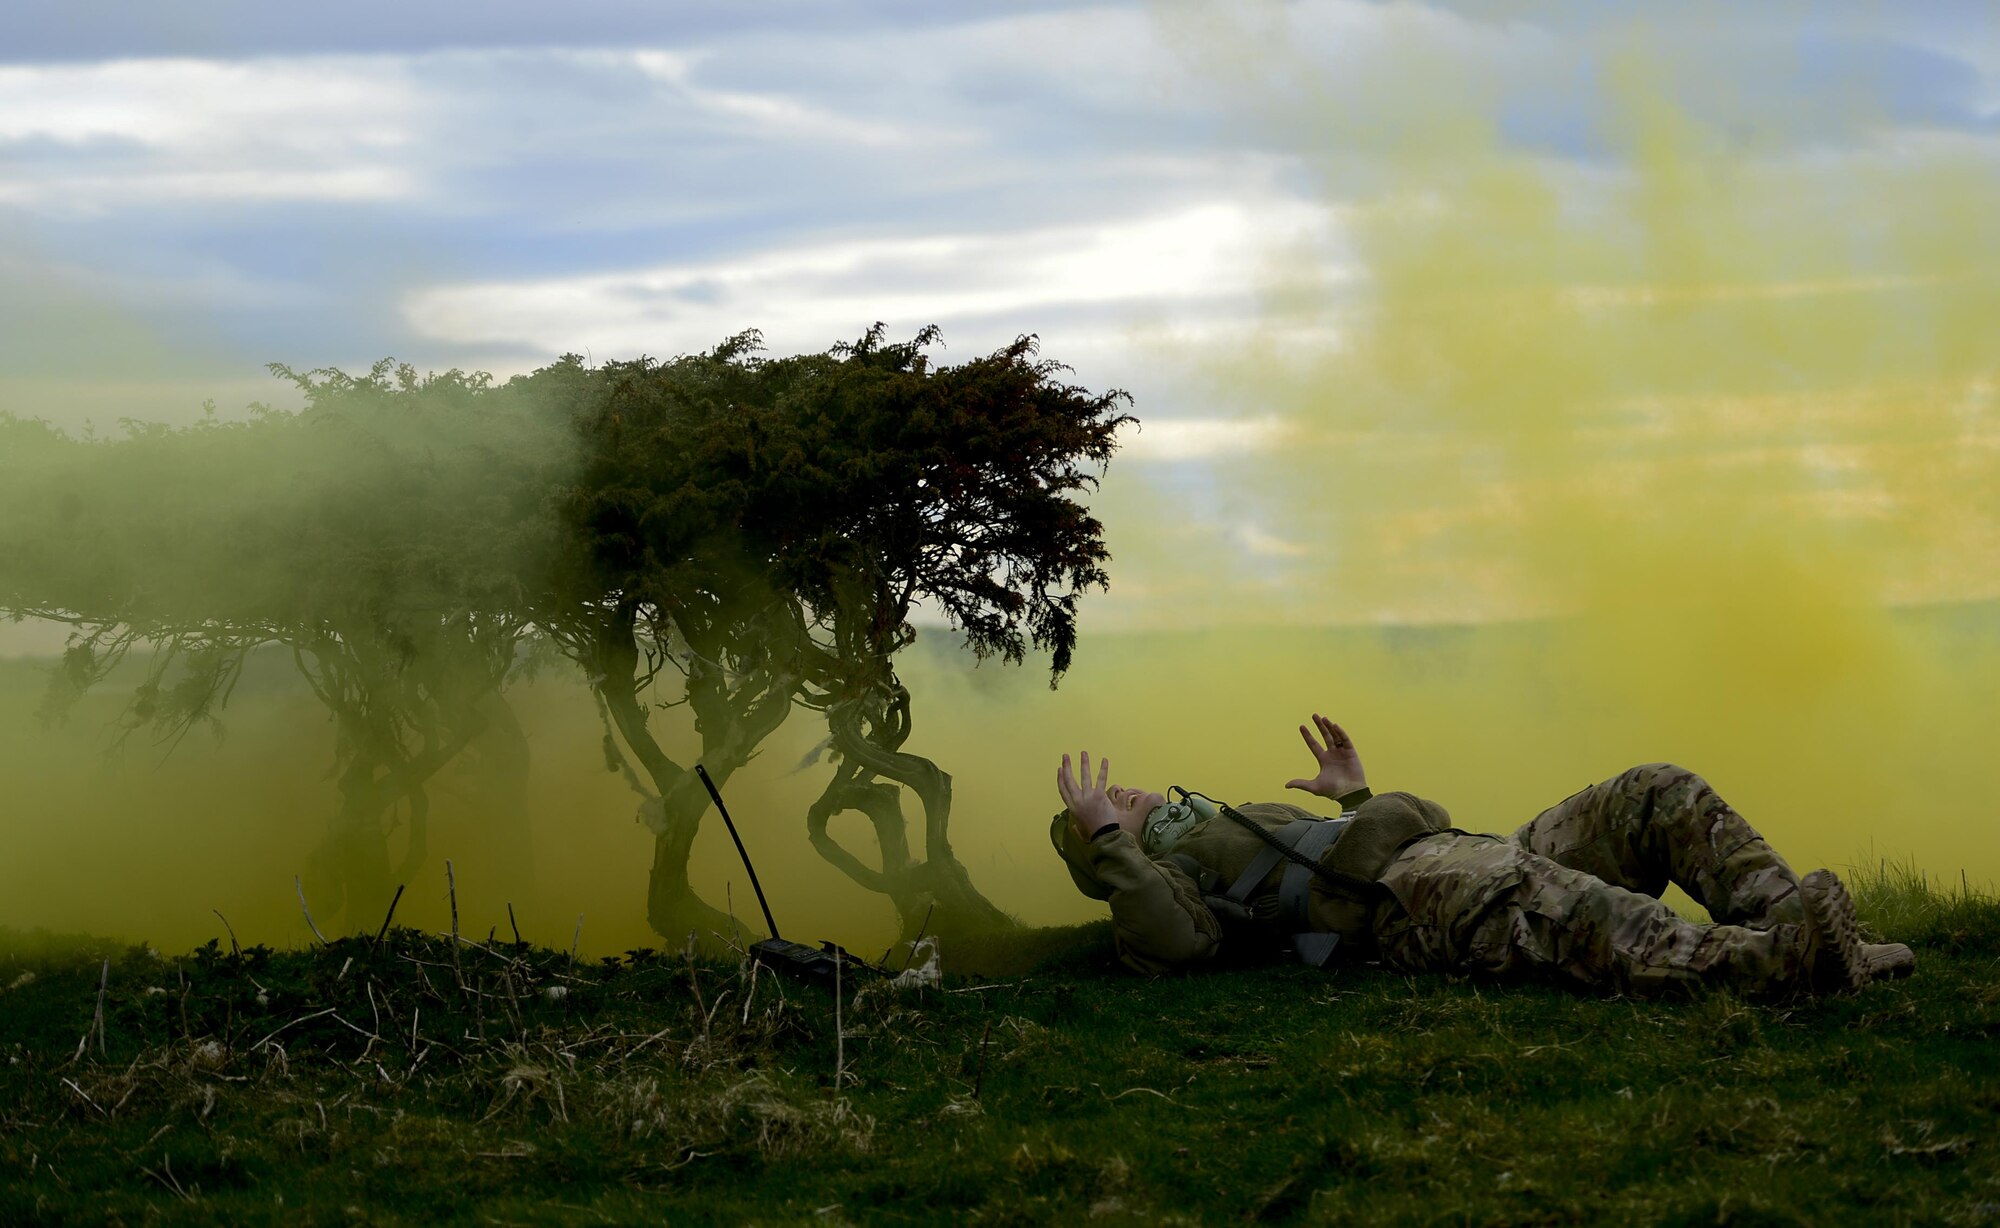 Staff Sgt. Rob Blume, a 56th Rescue Squadron HH-60G Pave Hawk intelligence analyst, pretends to be a survivor during a 56th RQS training mission at exercise Joint Warrior 15-1 in Scotland, April 21, 2015. The exercise enhanced the 56th RQS's capability to support future, real-world operations. (U.S . Air Force photo/Senior Airman Erin O'Shea)